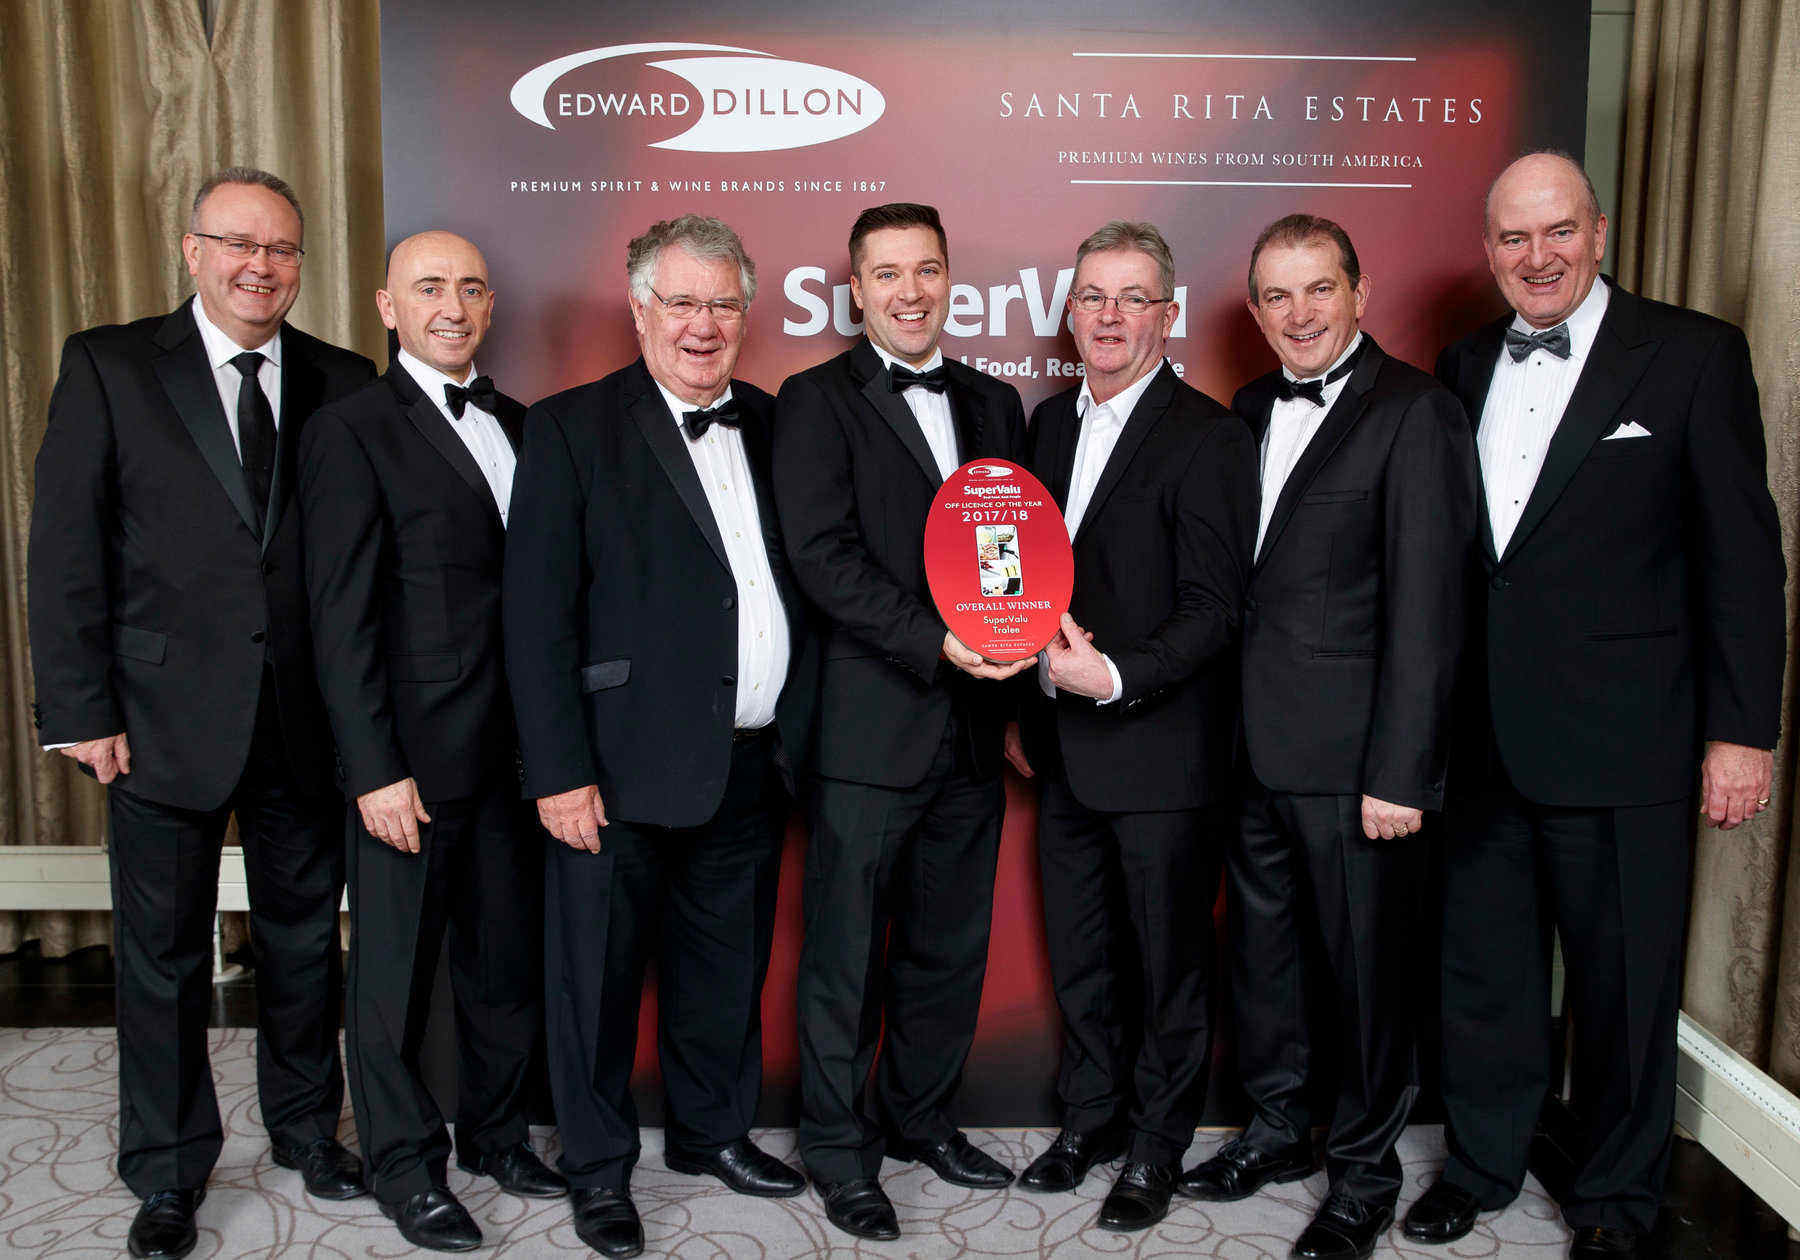 From left: Andy O’Hara of Edward Dillon and Donagh McClafferty of Musgrave Retail Partners Ireland, with Thomas Garvey, Chris O’Driscoll, Tony Carlos and Kevin McCarthy of Garvey’s SuperValu, Tralee and Tom Gaskin of Santa Rita Estates.